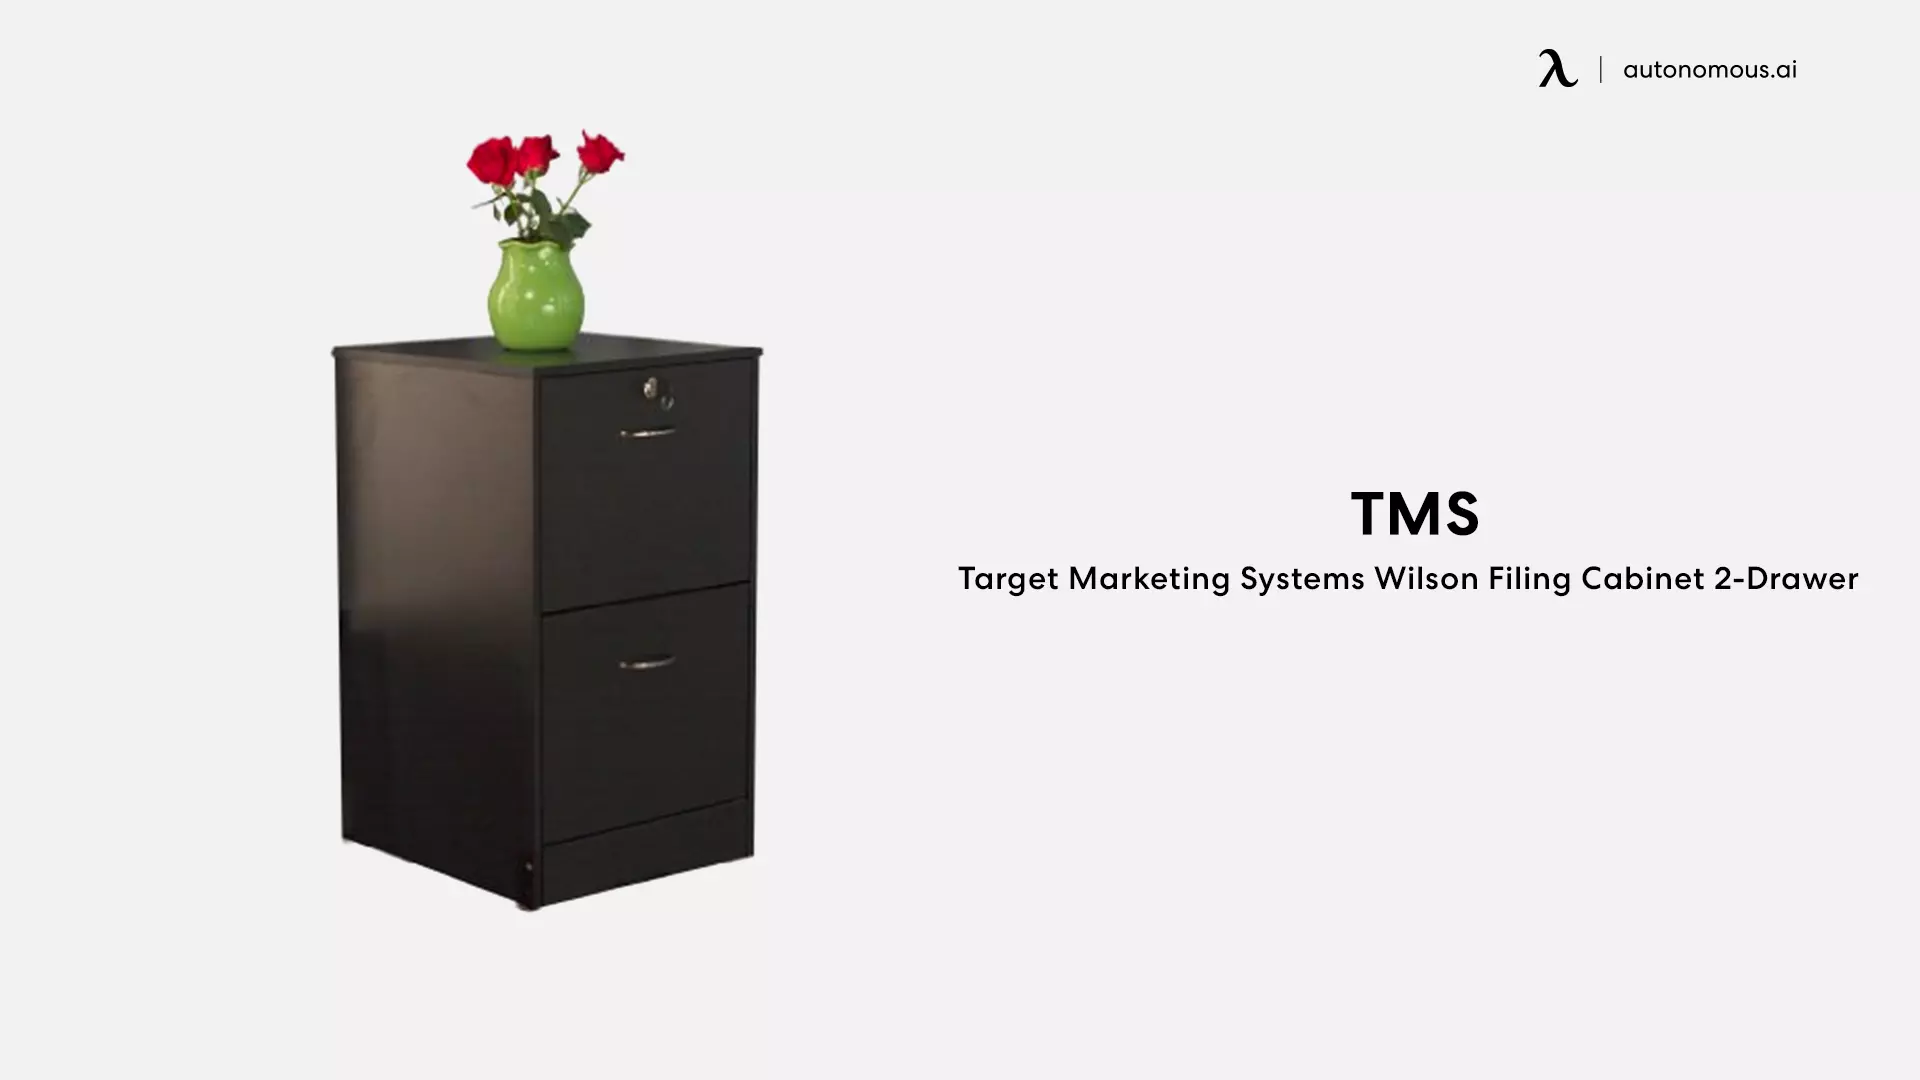 Target Marketing Systems Wilson Filing Cabinet 2-Drawer